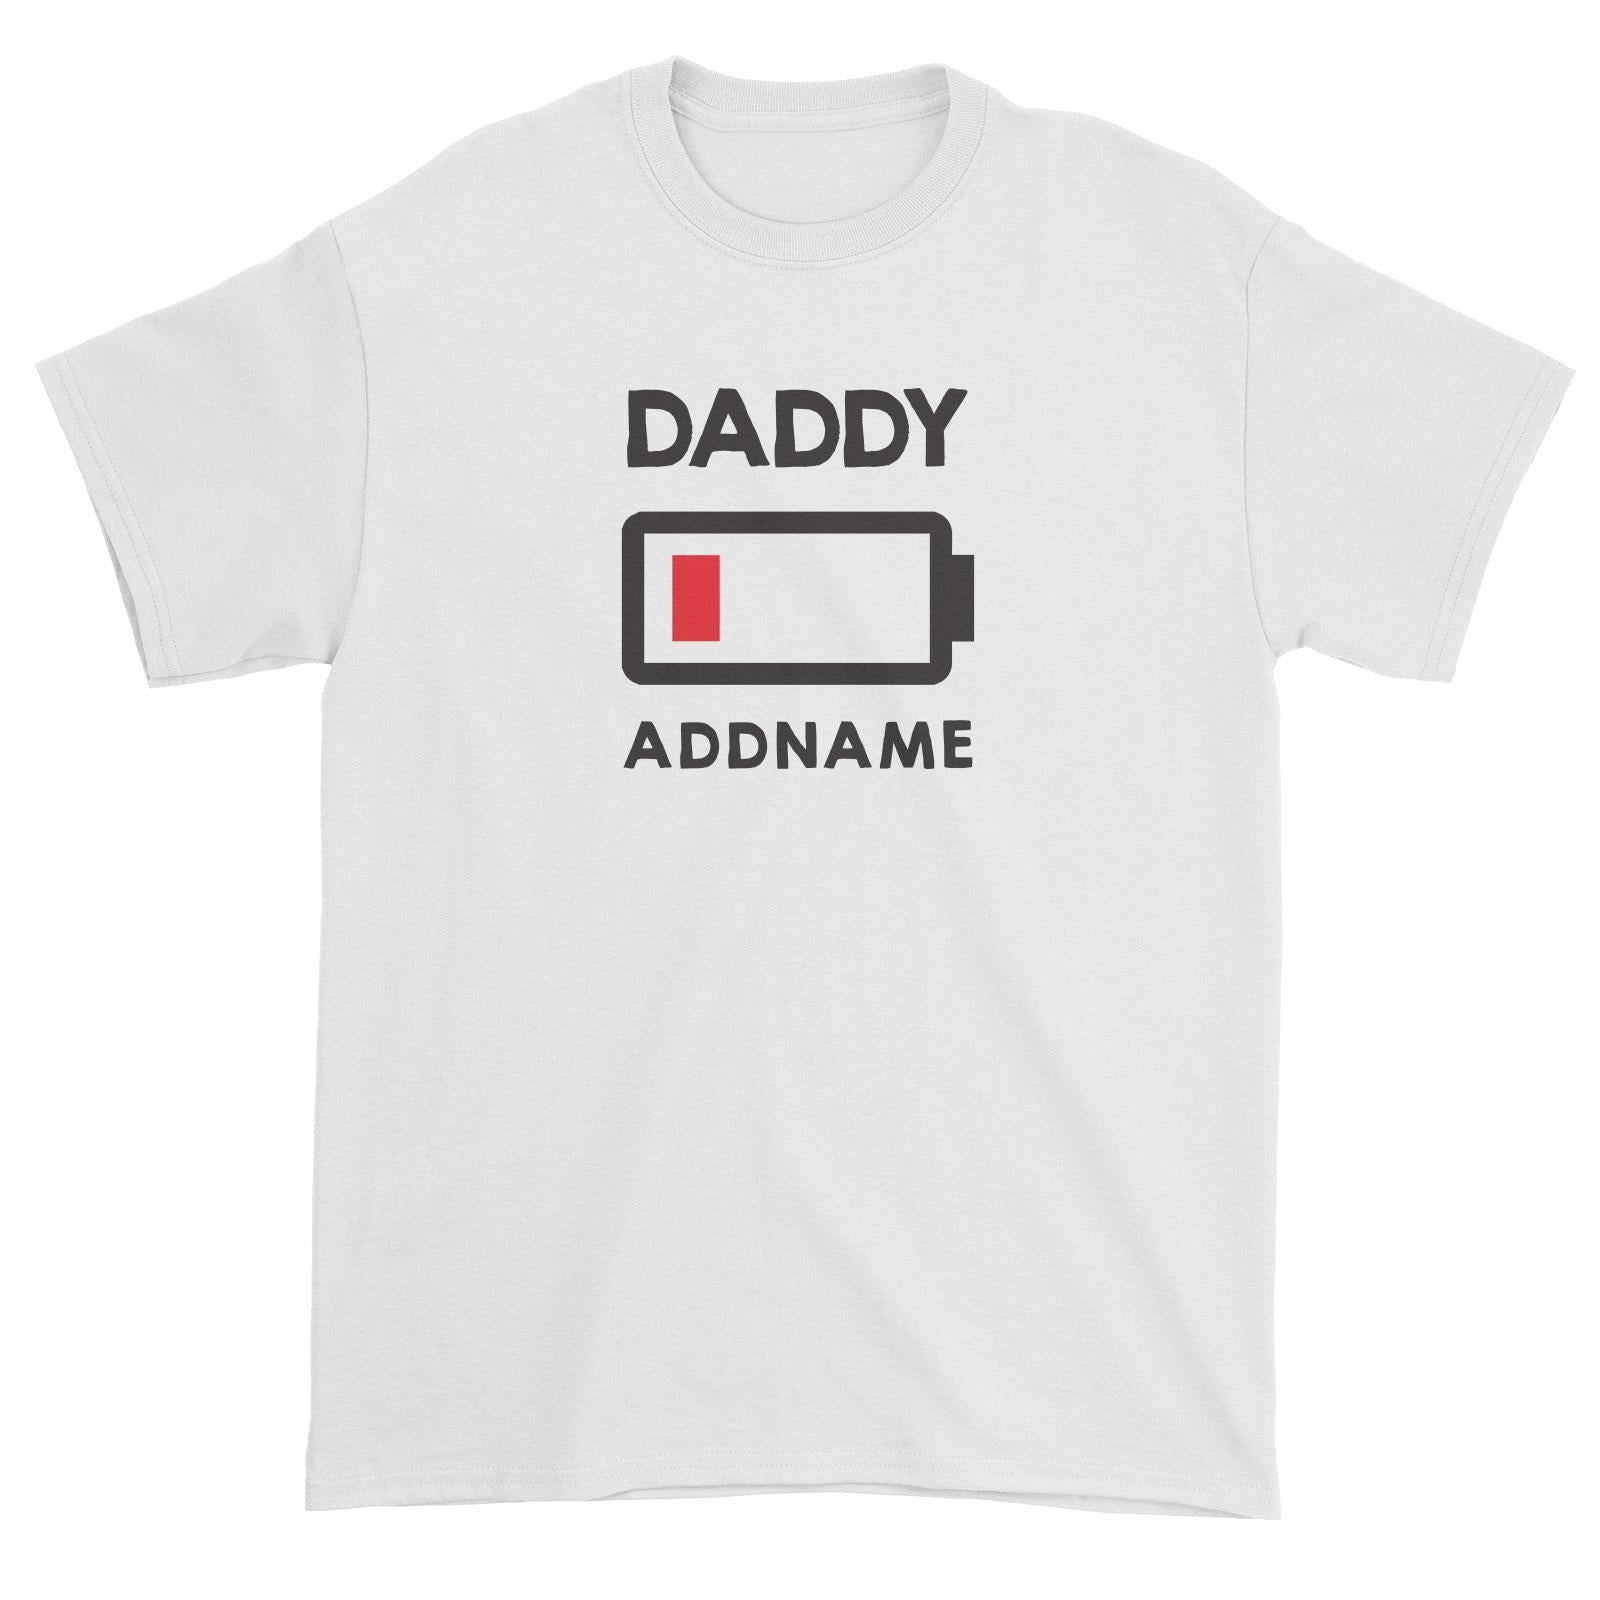 Battery Low Daddy Addname Unisex T-Shirt  Matching Family Personalizable Designs